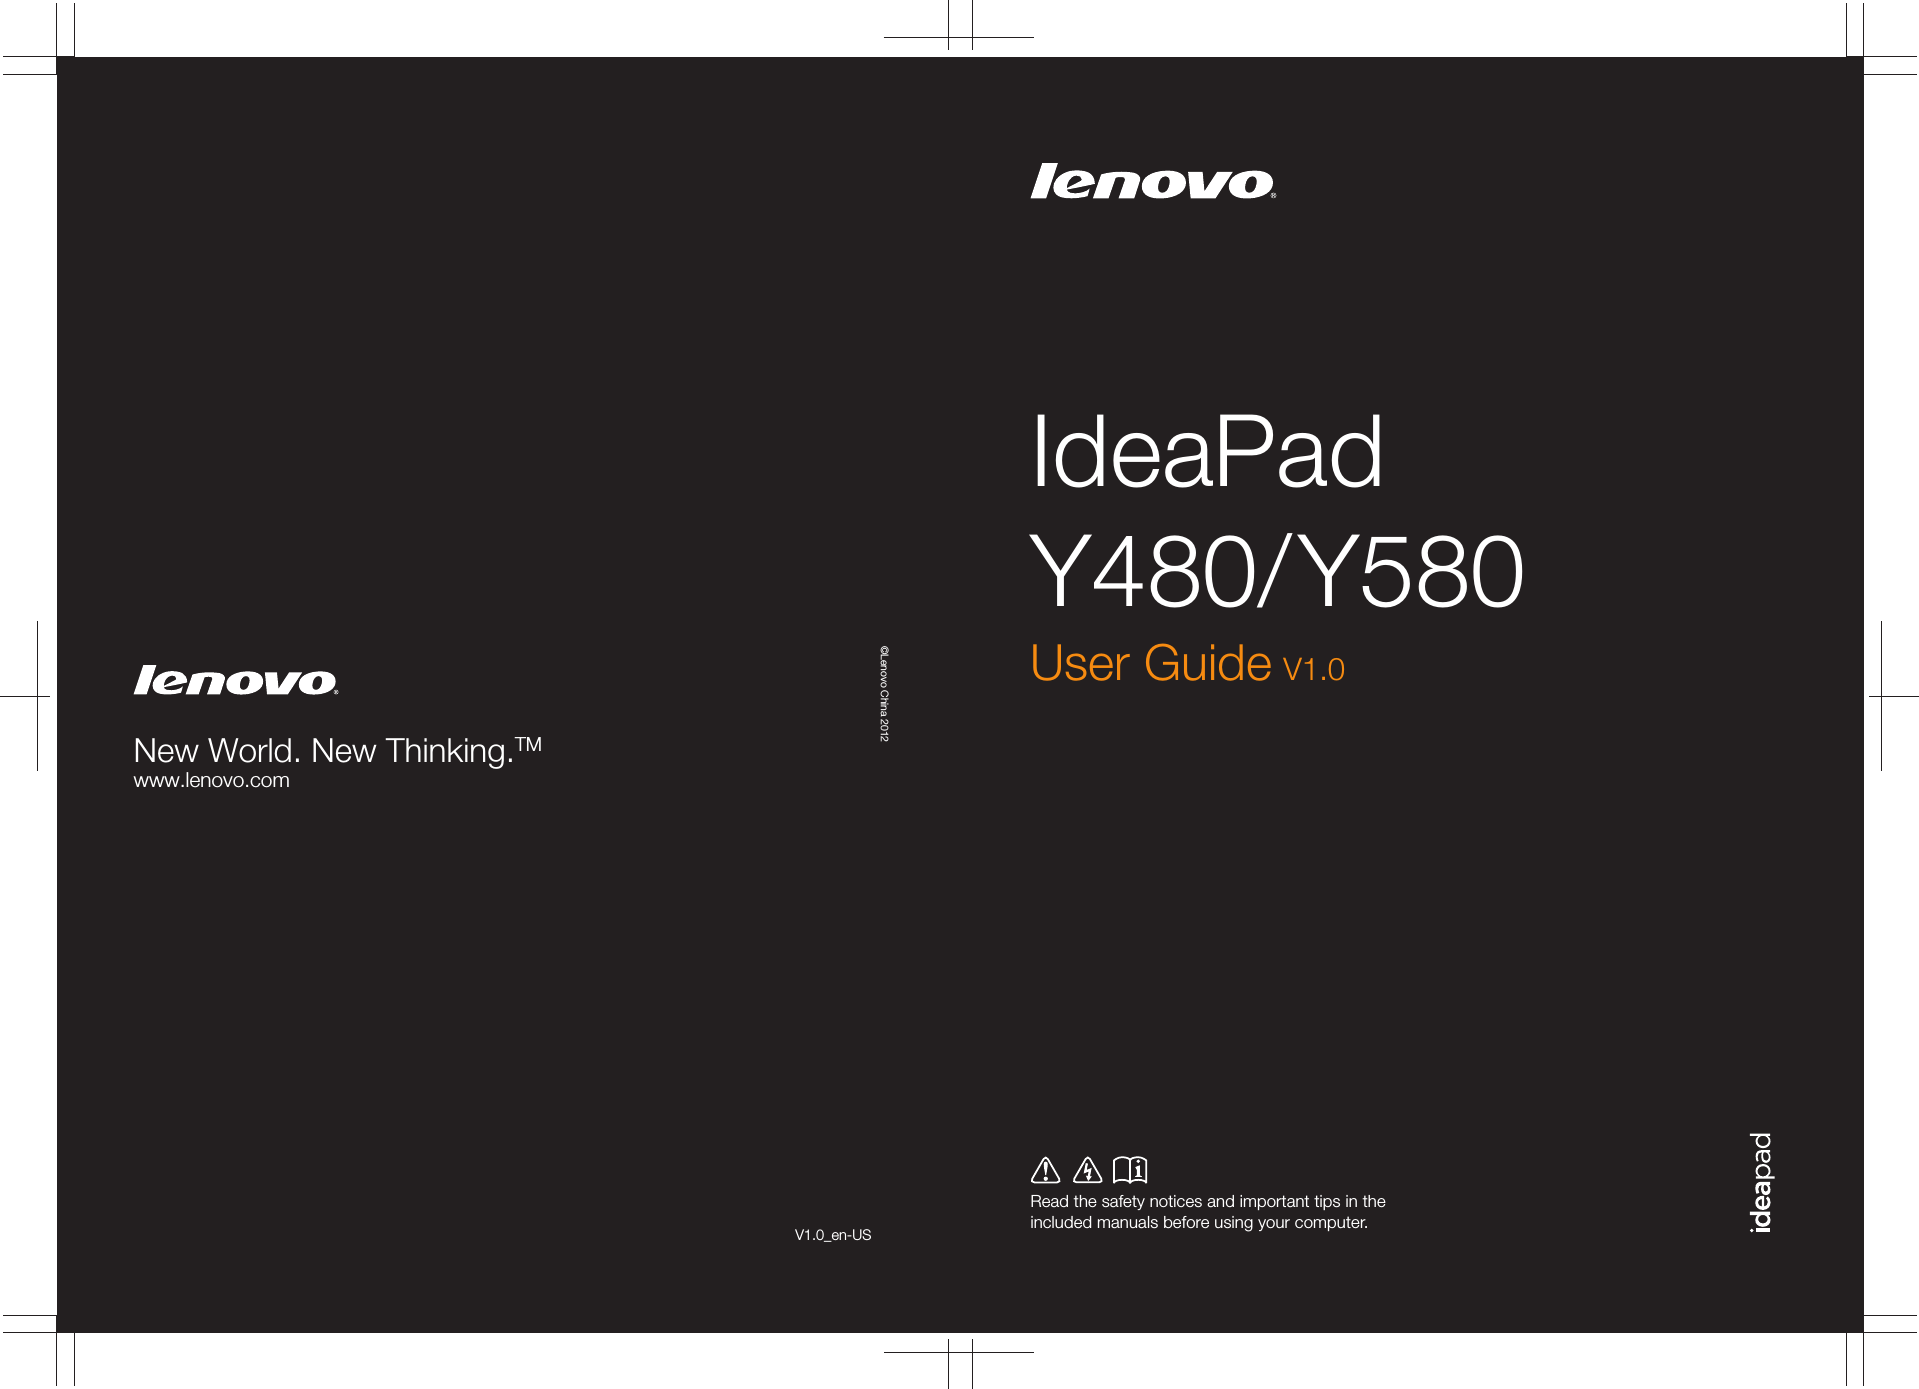 IdeaPad Y480/ Y580Read the safety notices and important tips in the included manuals before using your computer.©Lenovo China 2012New World. New Thinking.TMwww.lenovo.comUser Guide V1.0V1.0_en-US